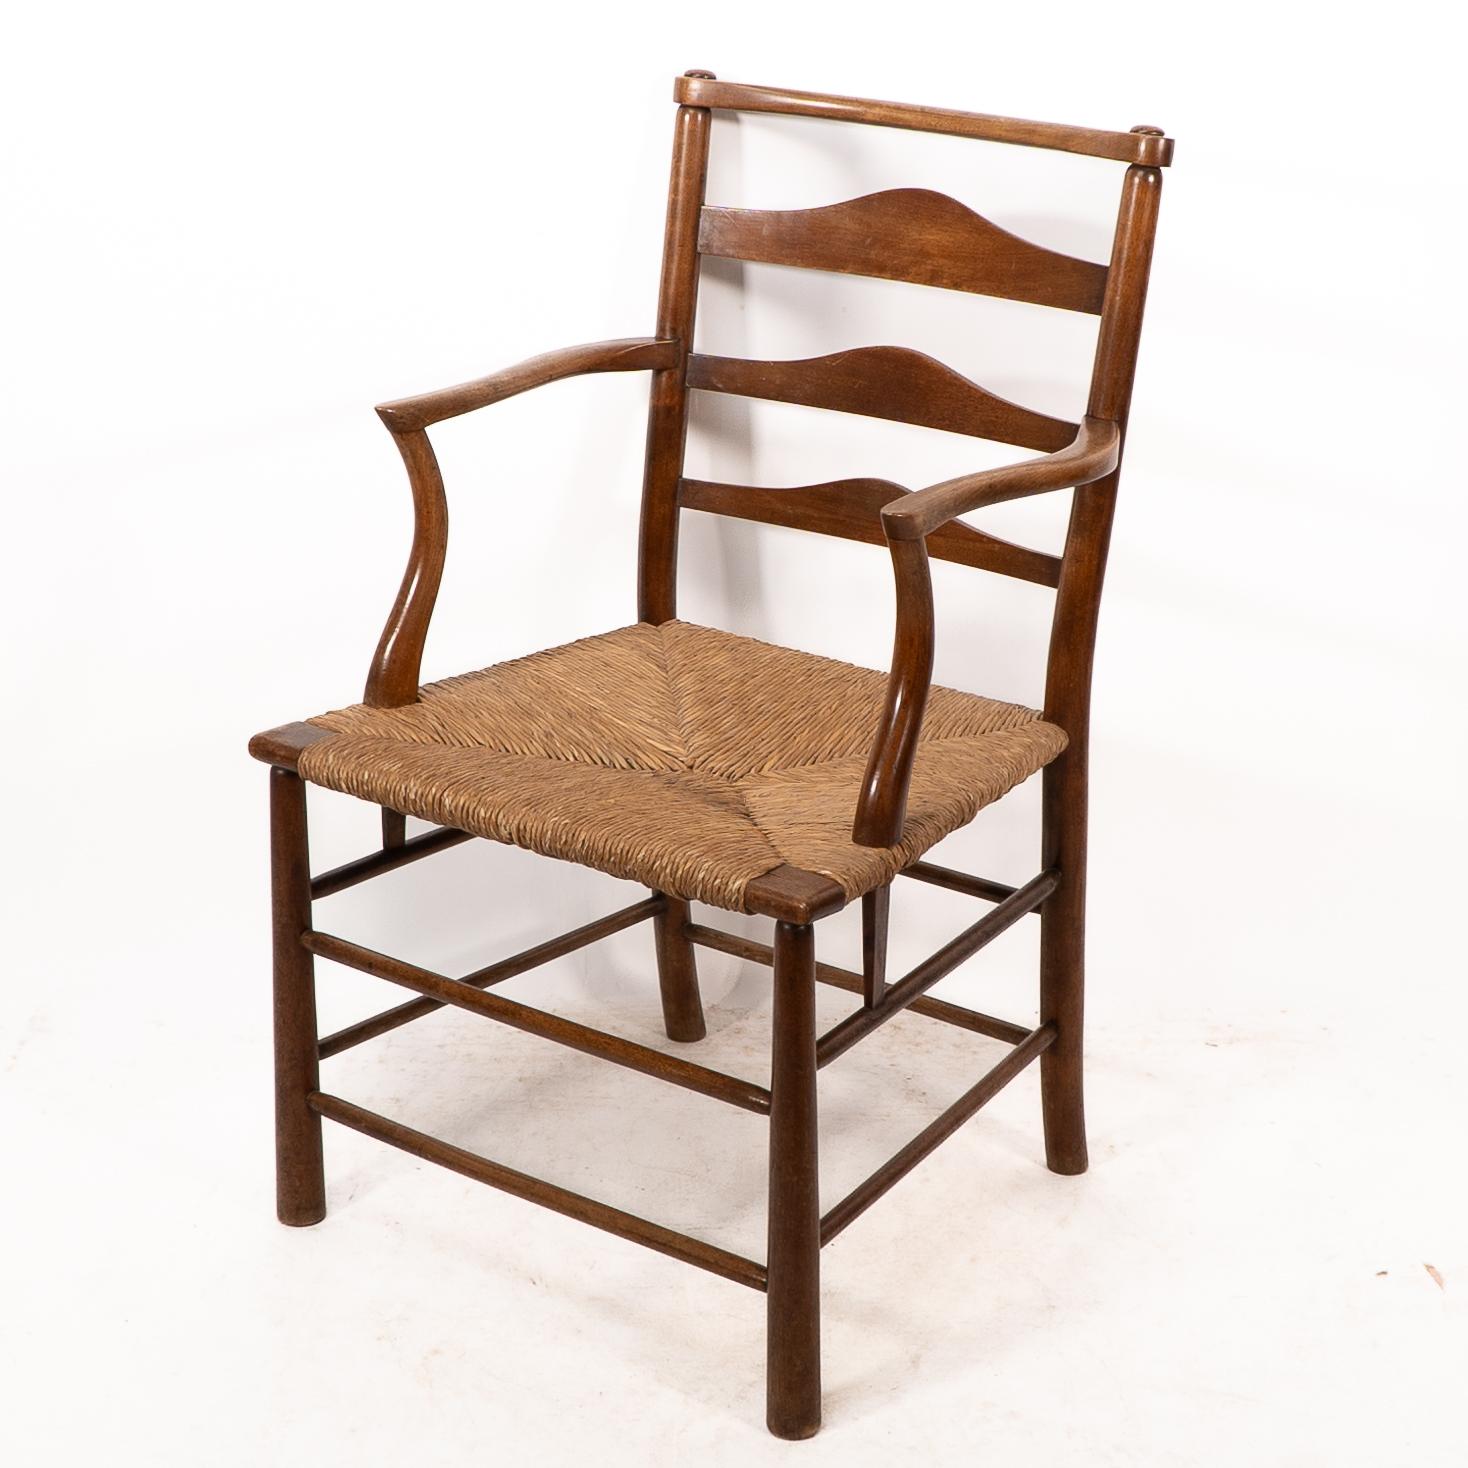 English C R Ashbee. An Arts and Crafts rush seat ladder back armchair For Sale